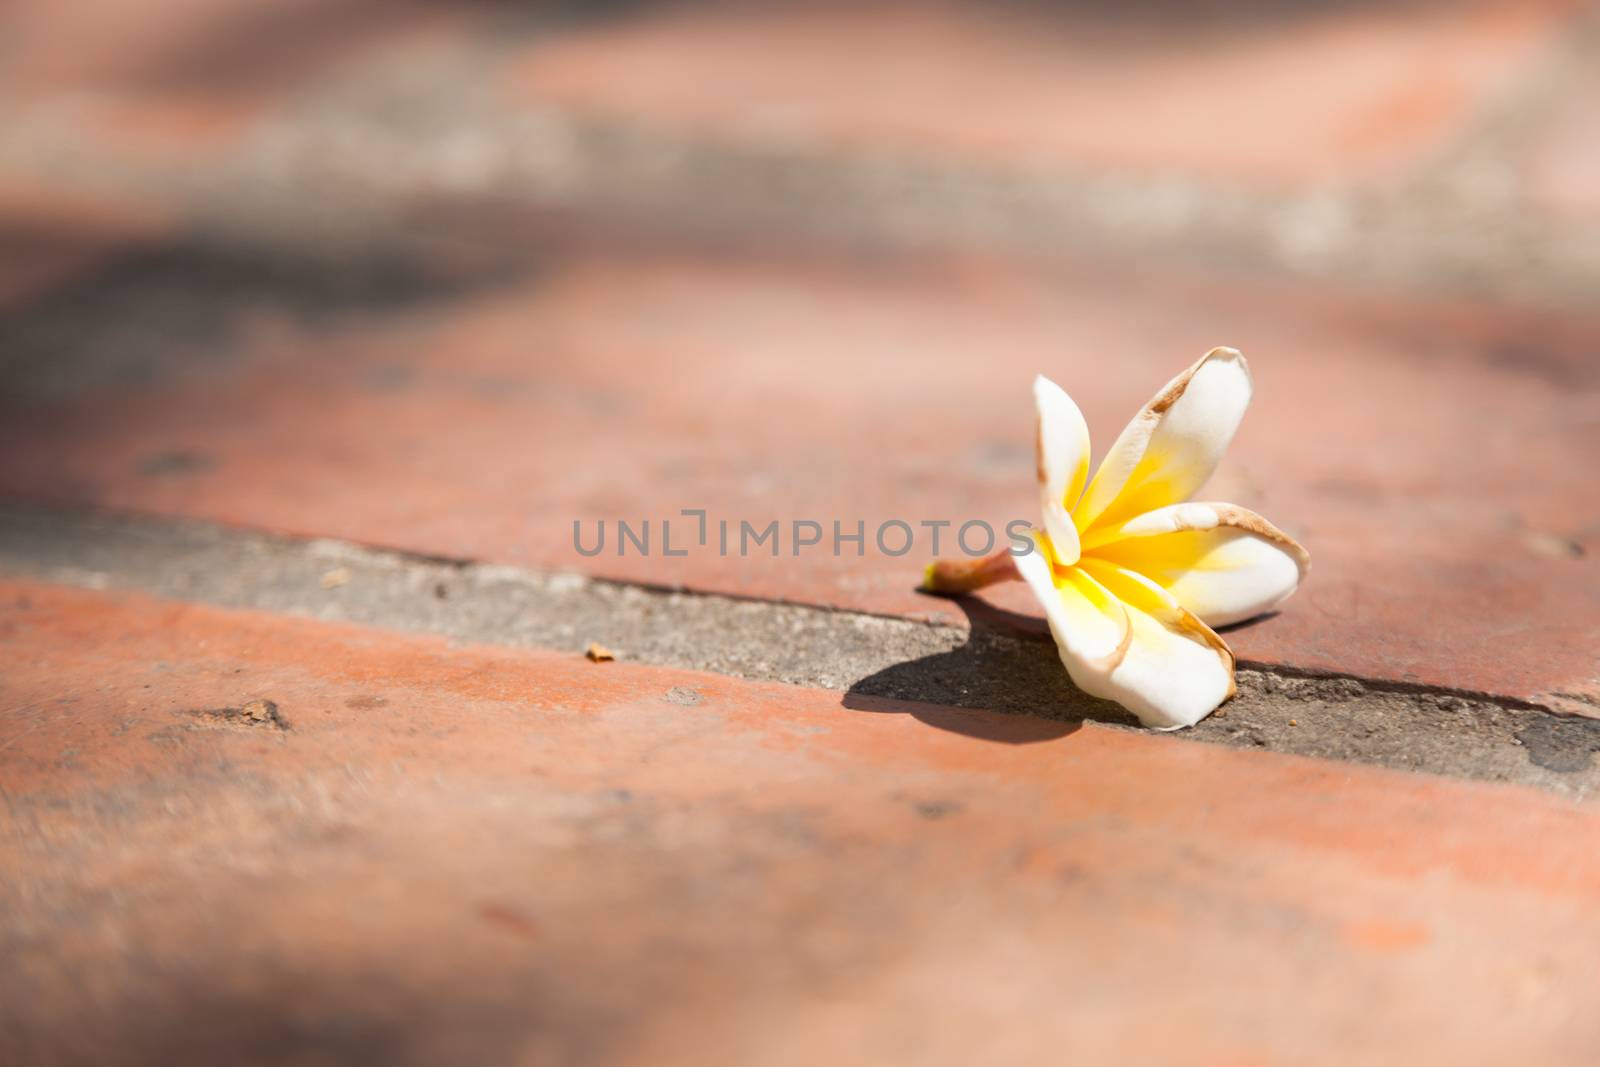 White flower on the ground by a454